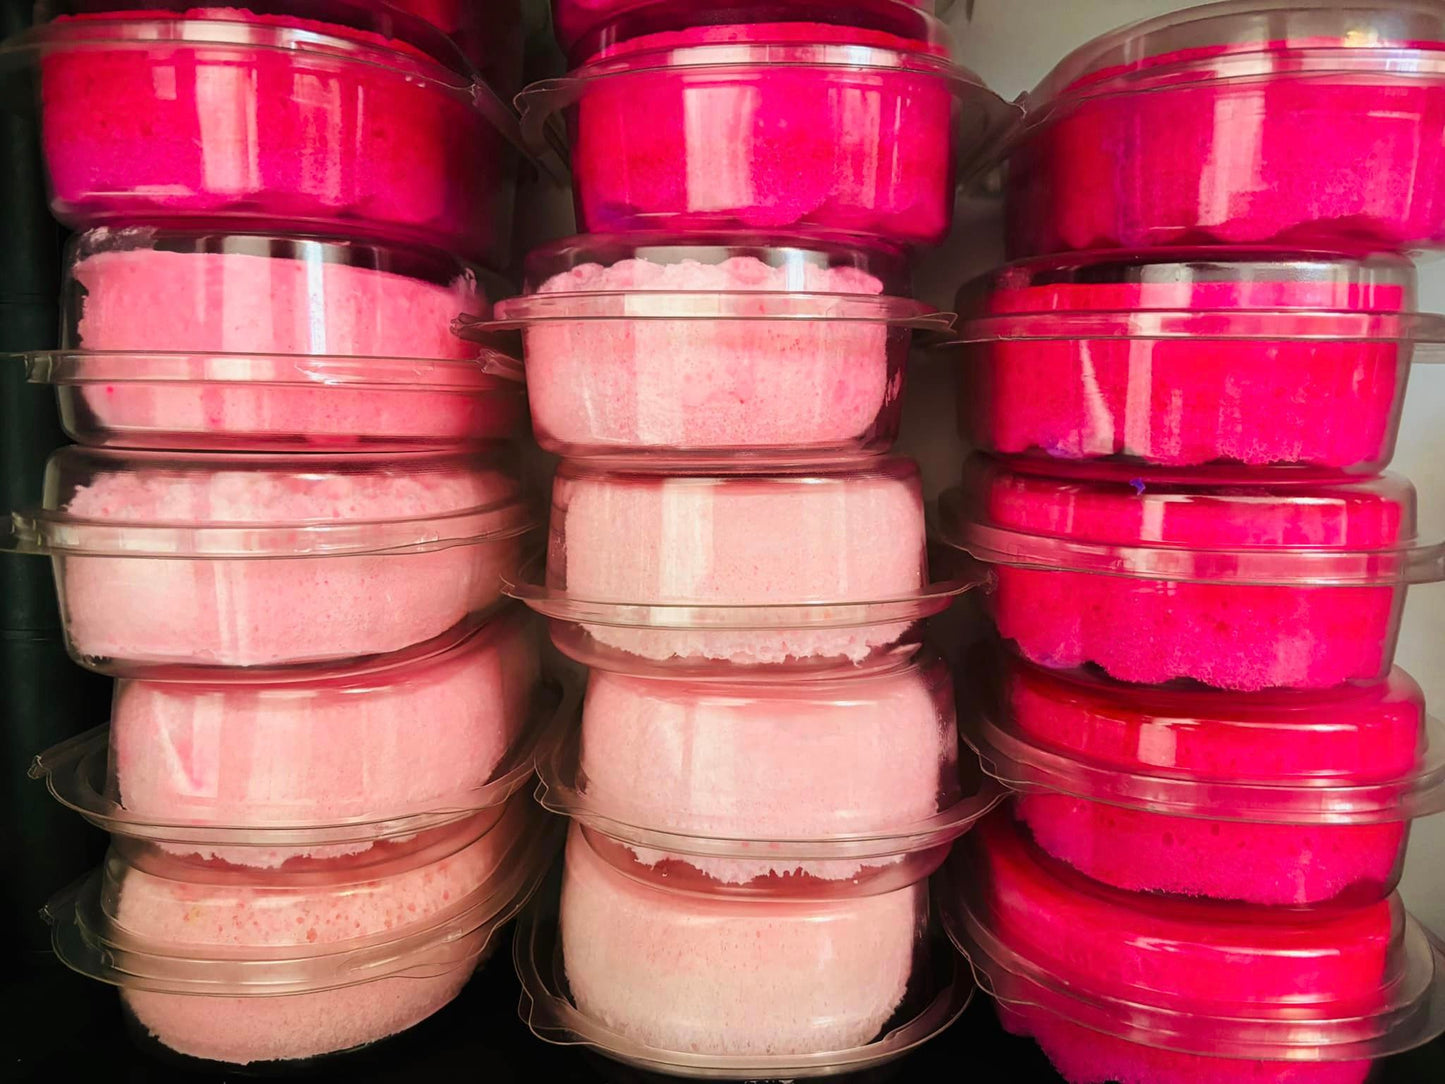 Stacks of clear plastic containers filled with The Soap Gal x's pink and magenta Random Scented Exfoliating Soap Sponges, available with a special BUY 2 GET 65% OFF THE 3RD SOAP SPONGE offer, are arranged in three columns.